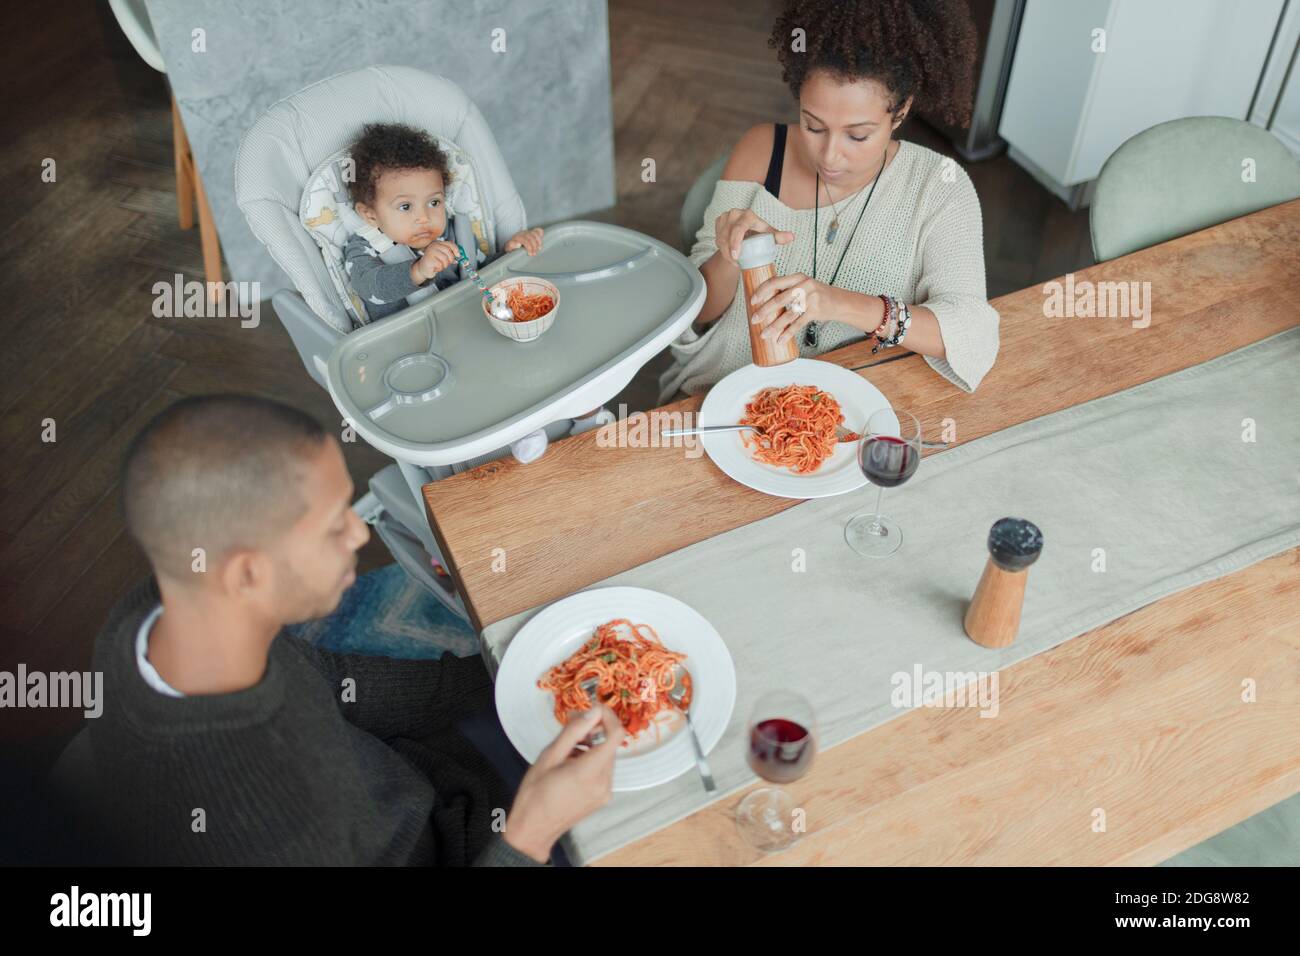 Family eating spaghetti at dining table and high chair Stock Photo